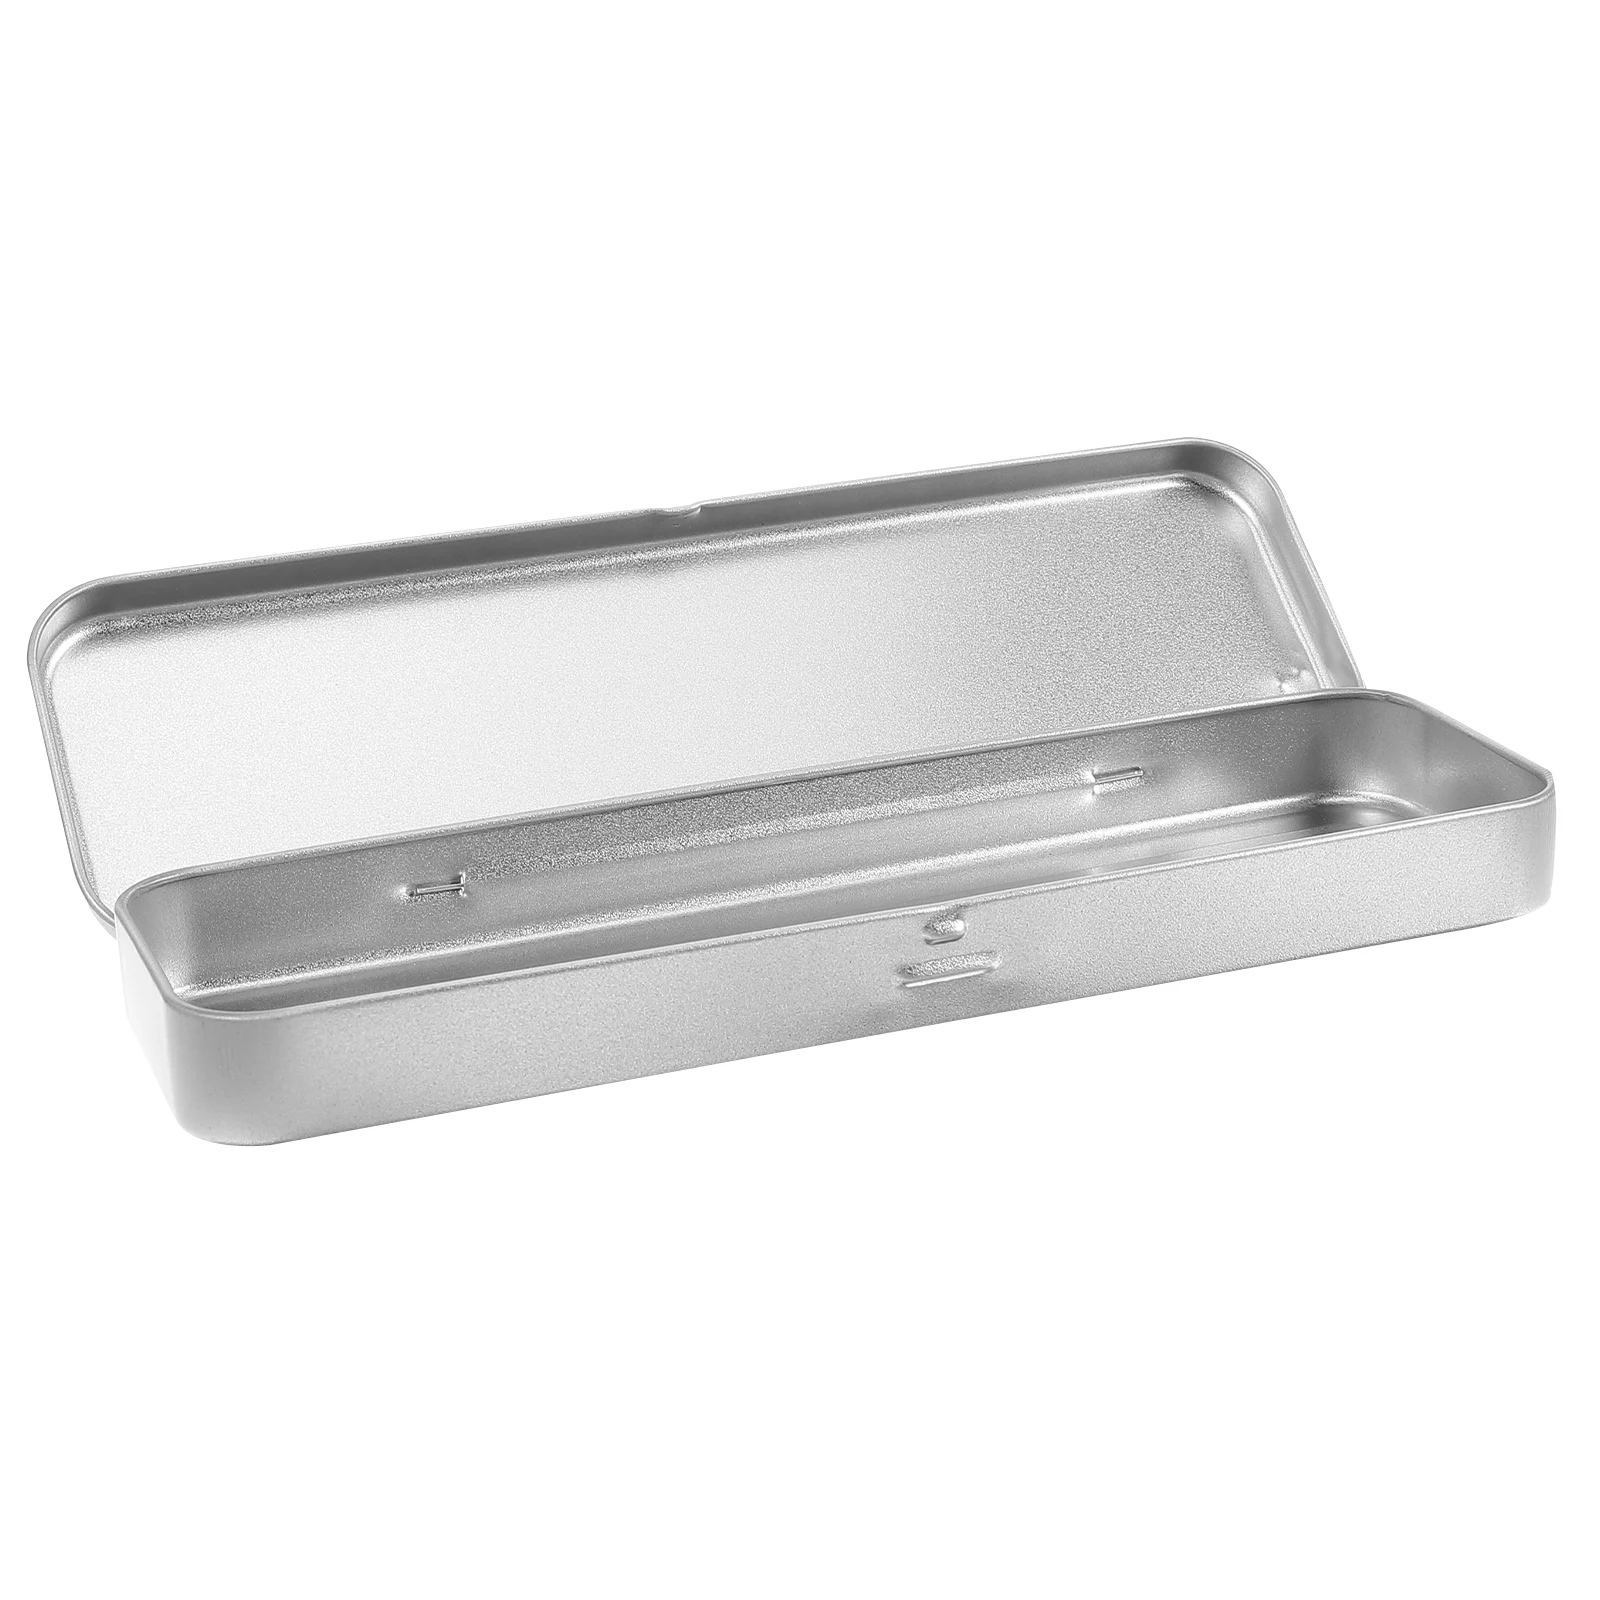 

Empty Tin Box Case Containers Metal Rectangular Tin with Hinged Lid Silver Storage Organizer Tins for Makeup Brush Pen holder